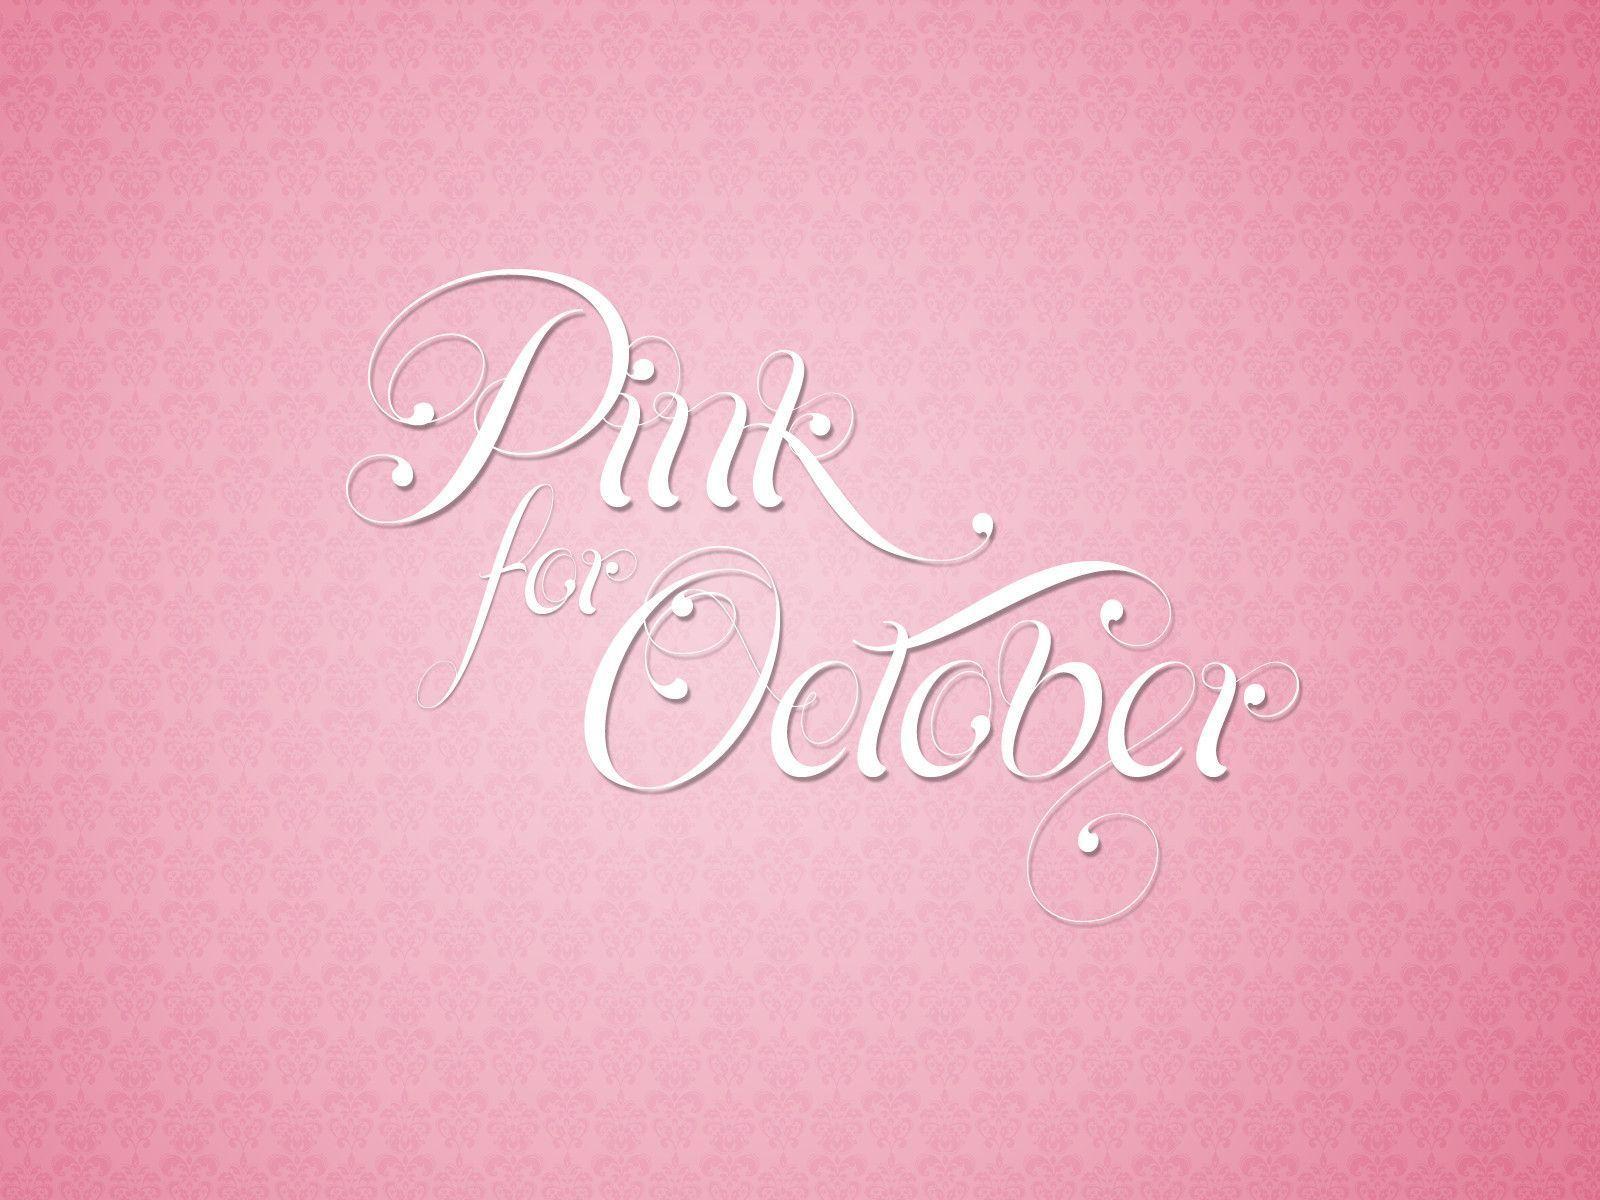 breast cancer awareness month events